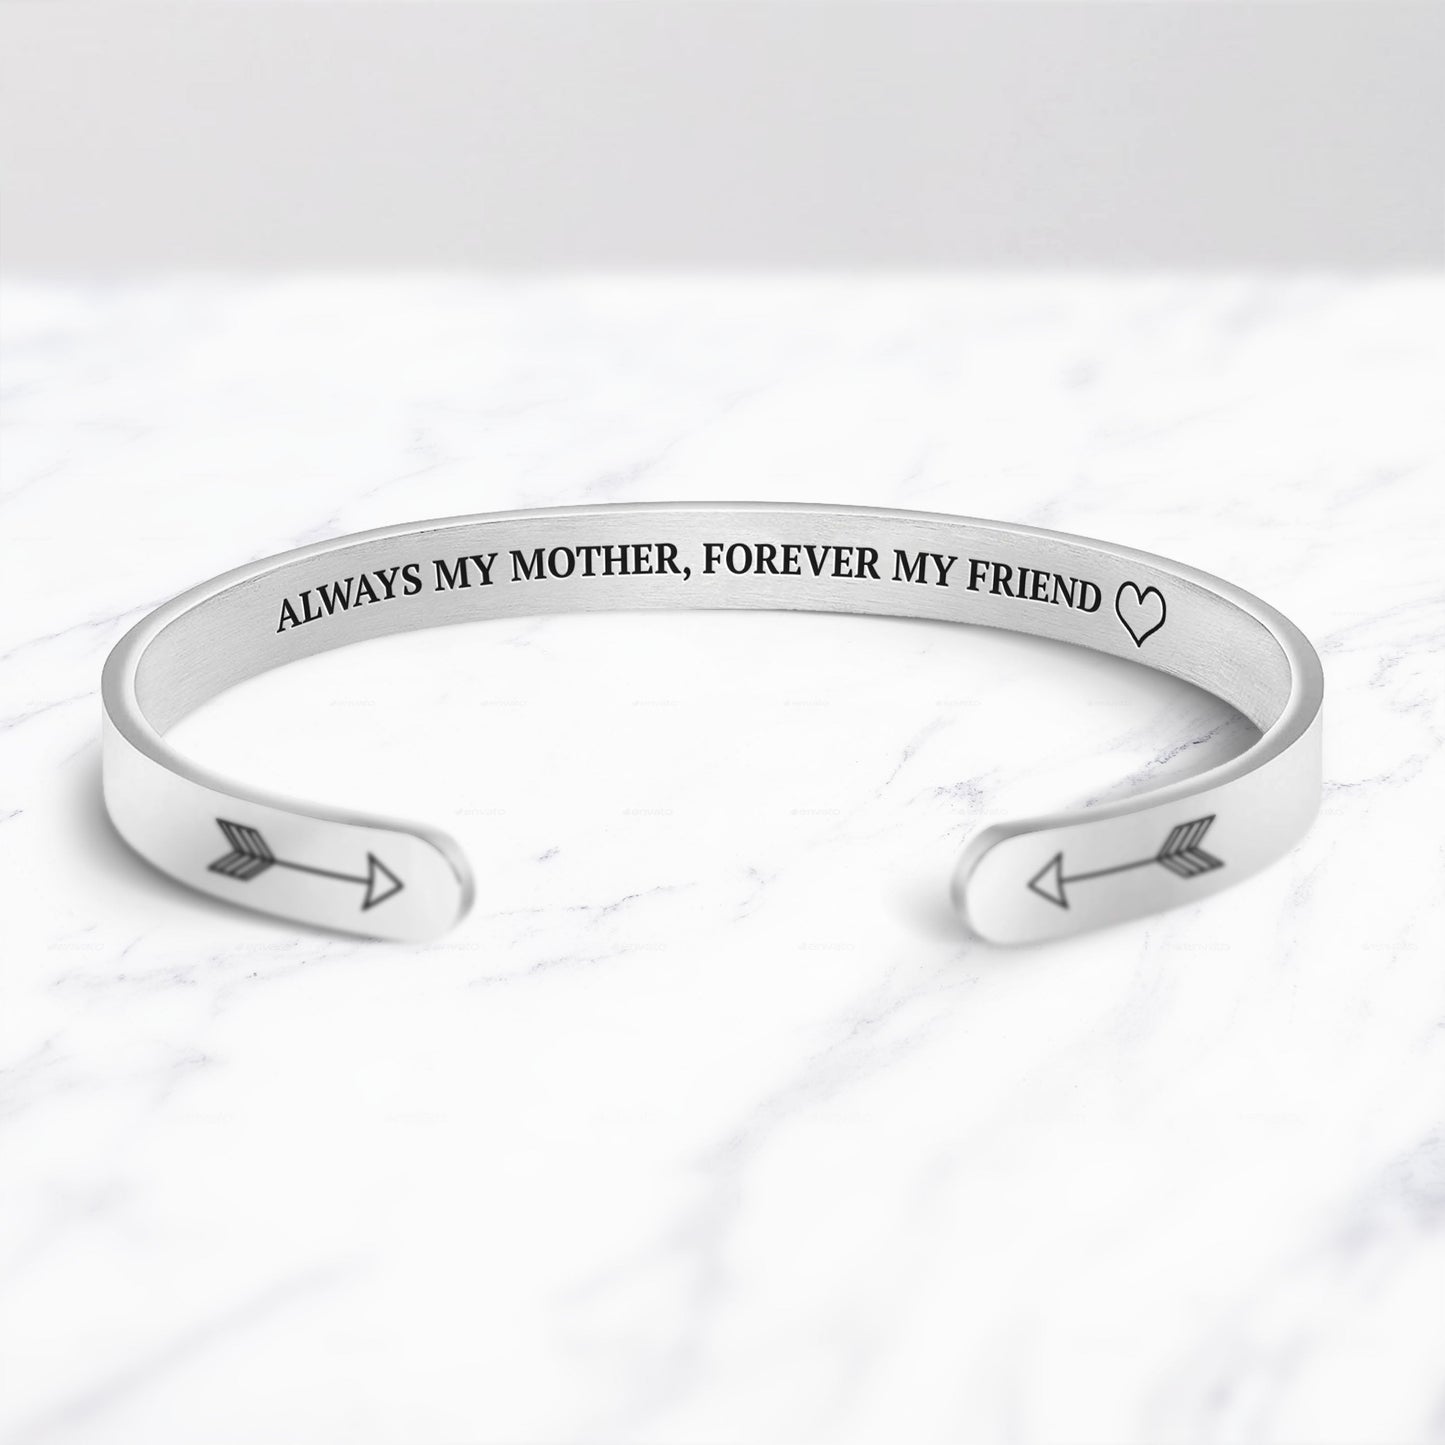 Always My Mother, Forever My Friend Cuff Bracelet bracelet with silver plating on a marble background